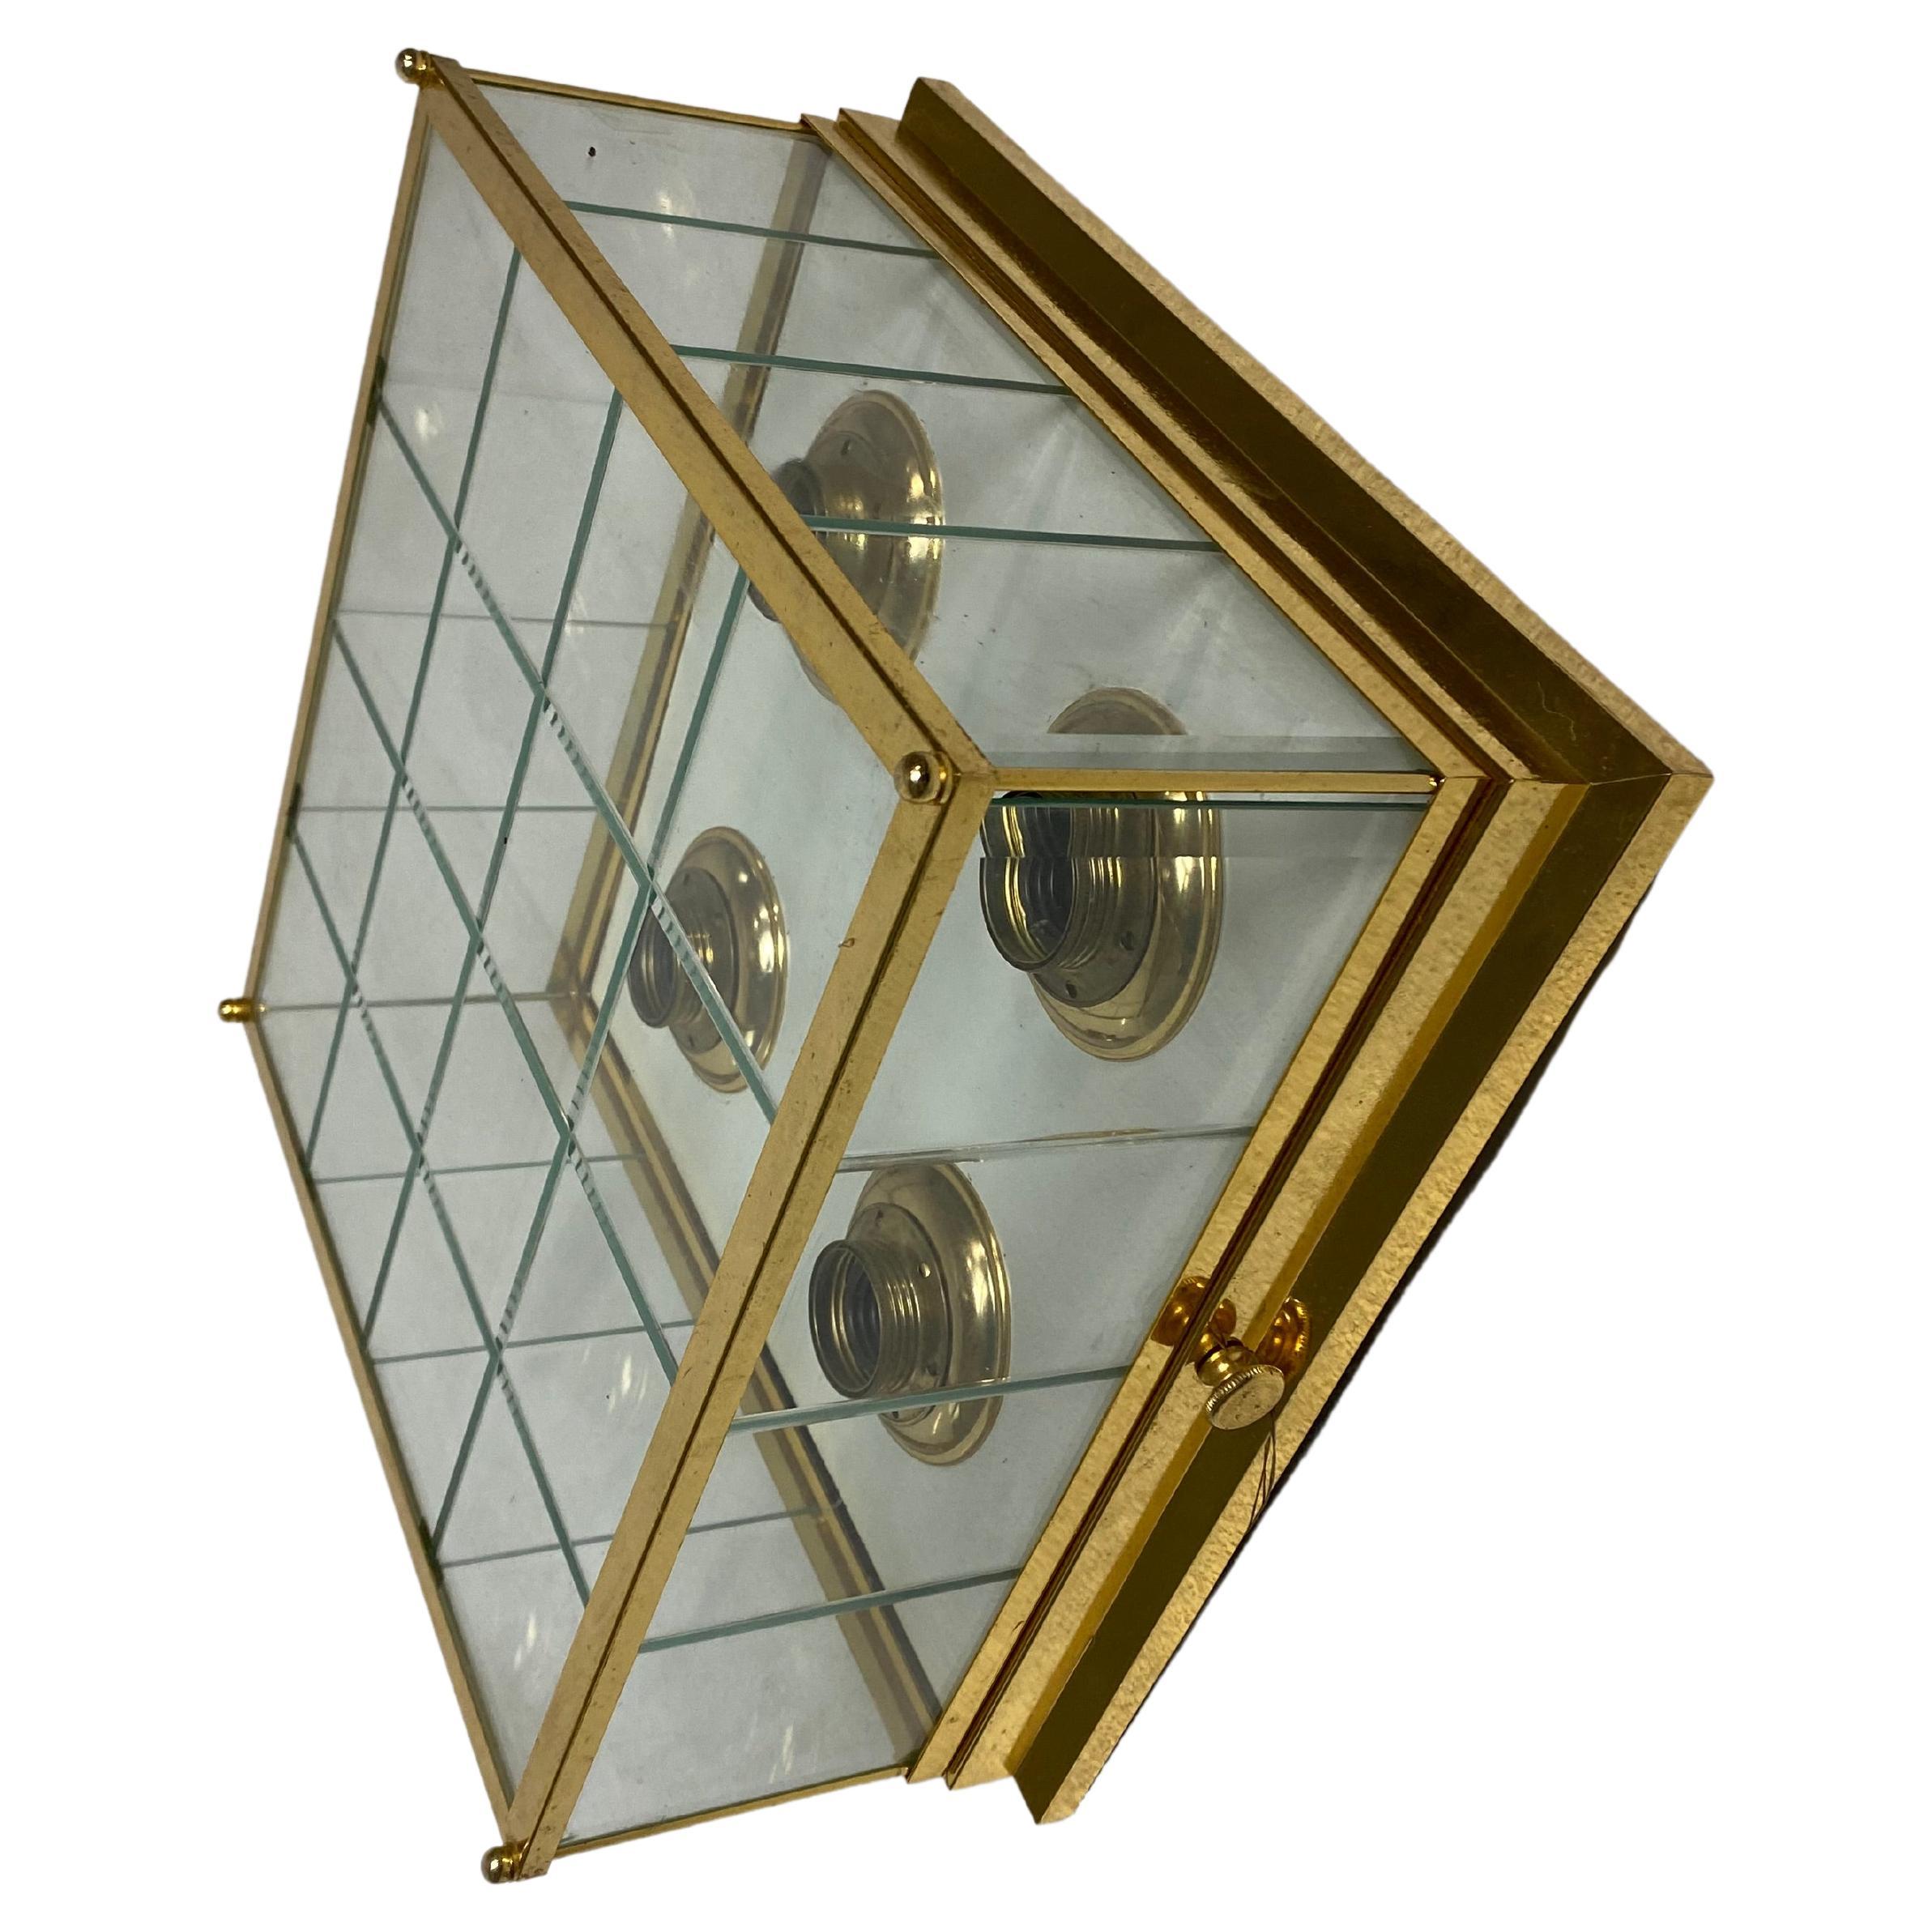 Ceiling/Wall Lamp in Style of Adolf Loos by WKR Germany